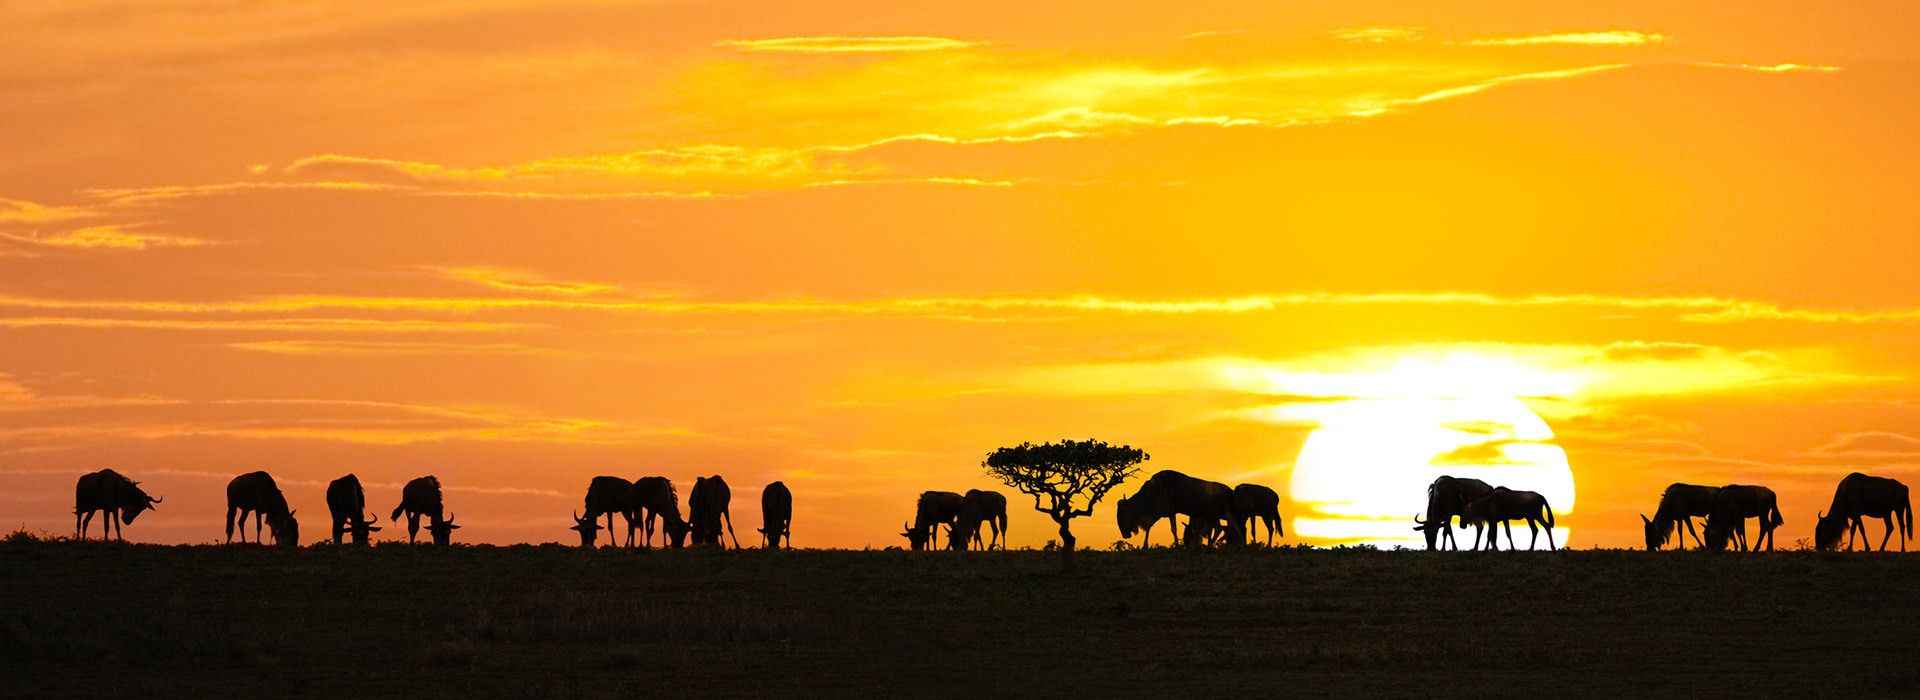 Tanzania Travel Guide - Travel Insights and Tips